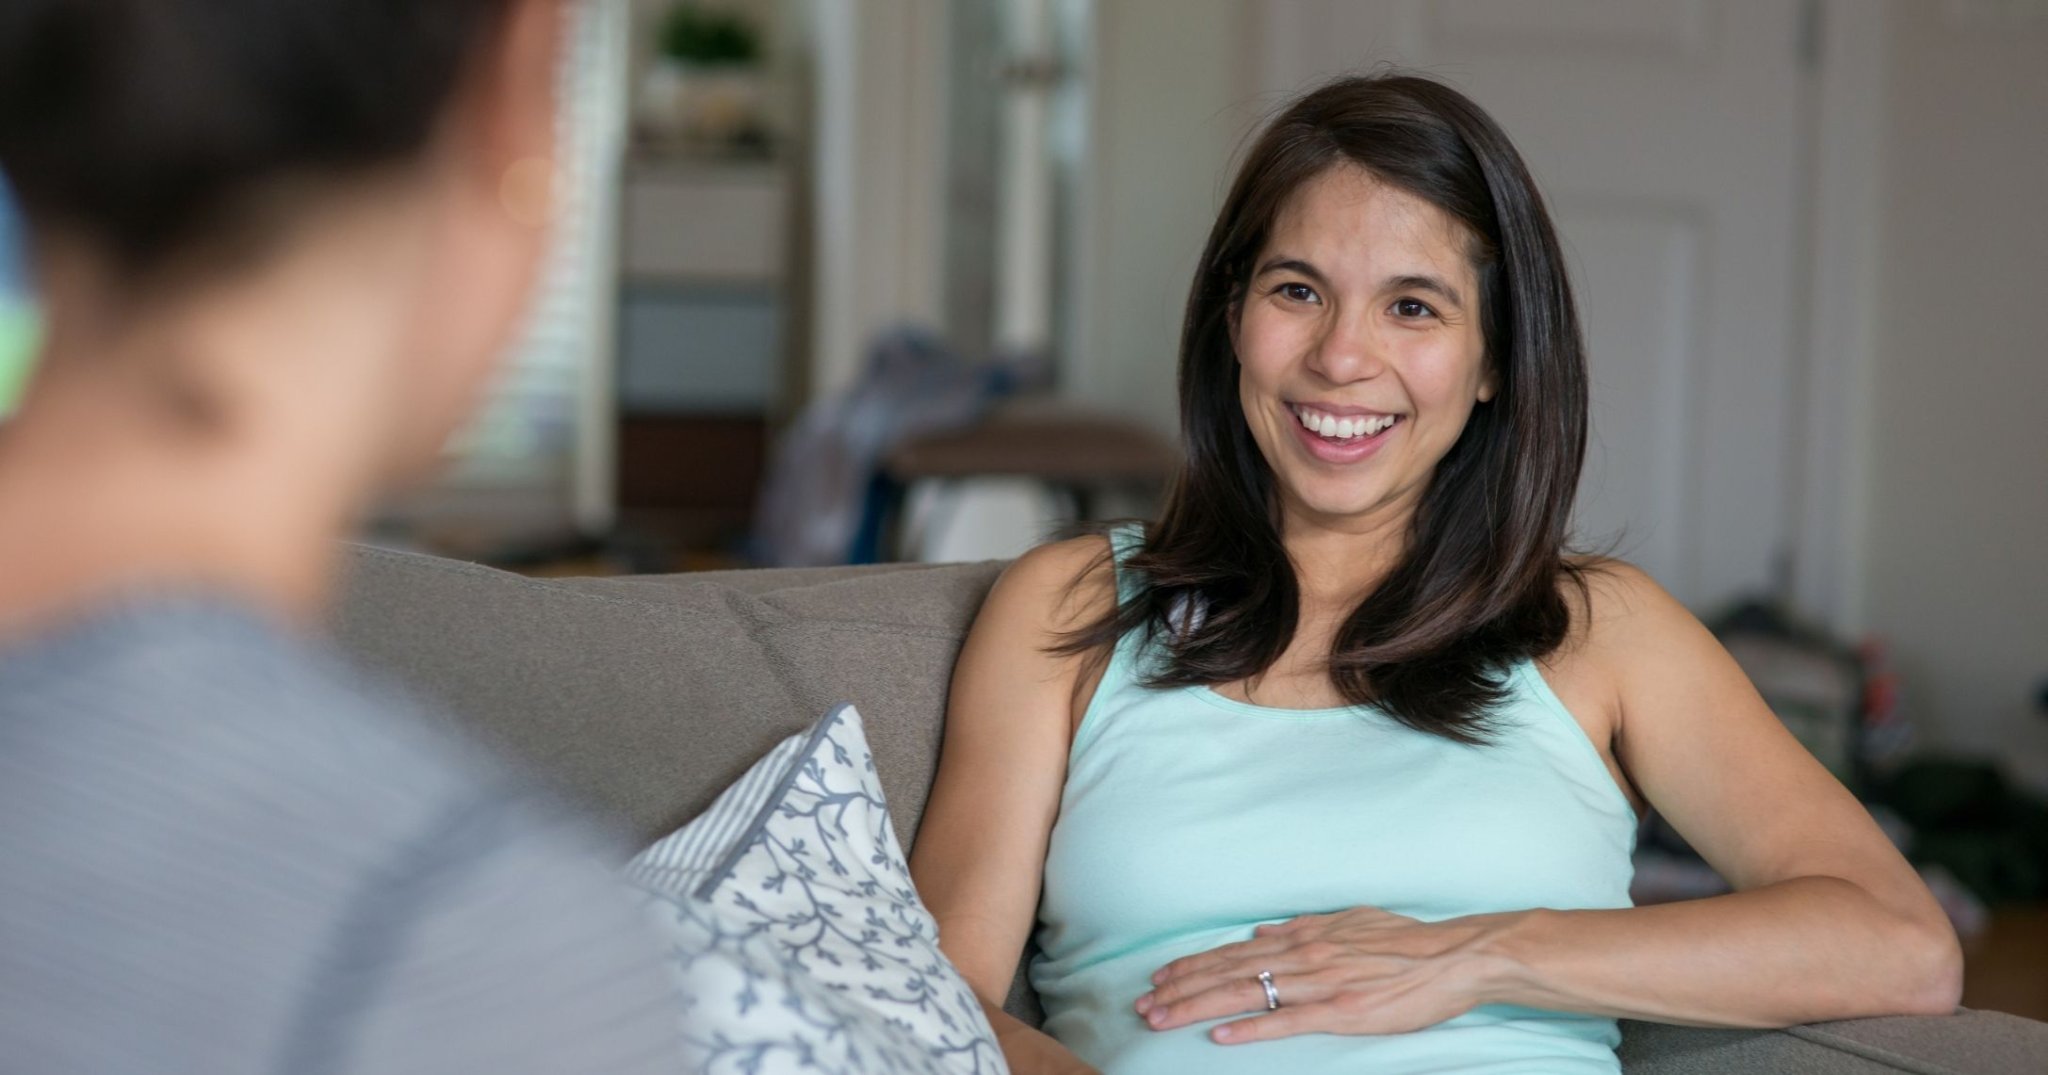 Mom of 2 Fed Up With Pregnant Friend Who Acts Like She Knows Everything About Being a Mom